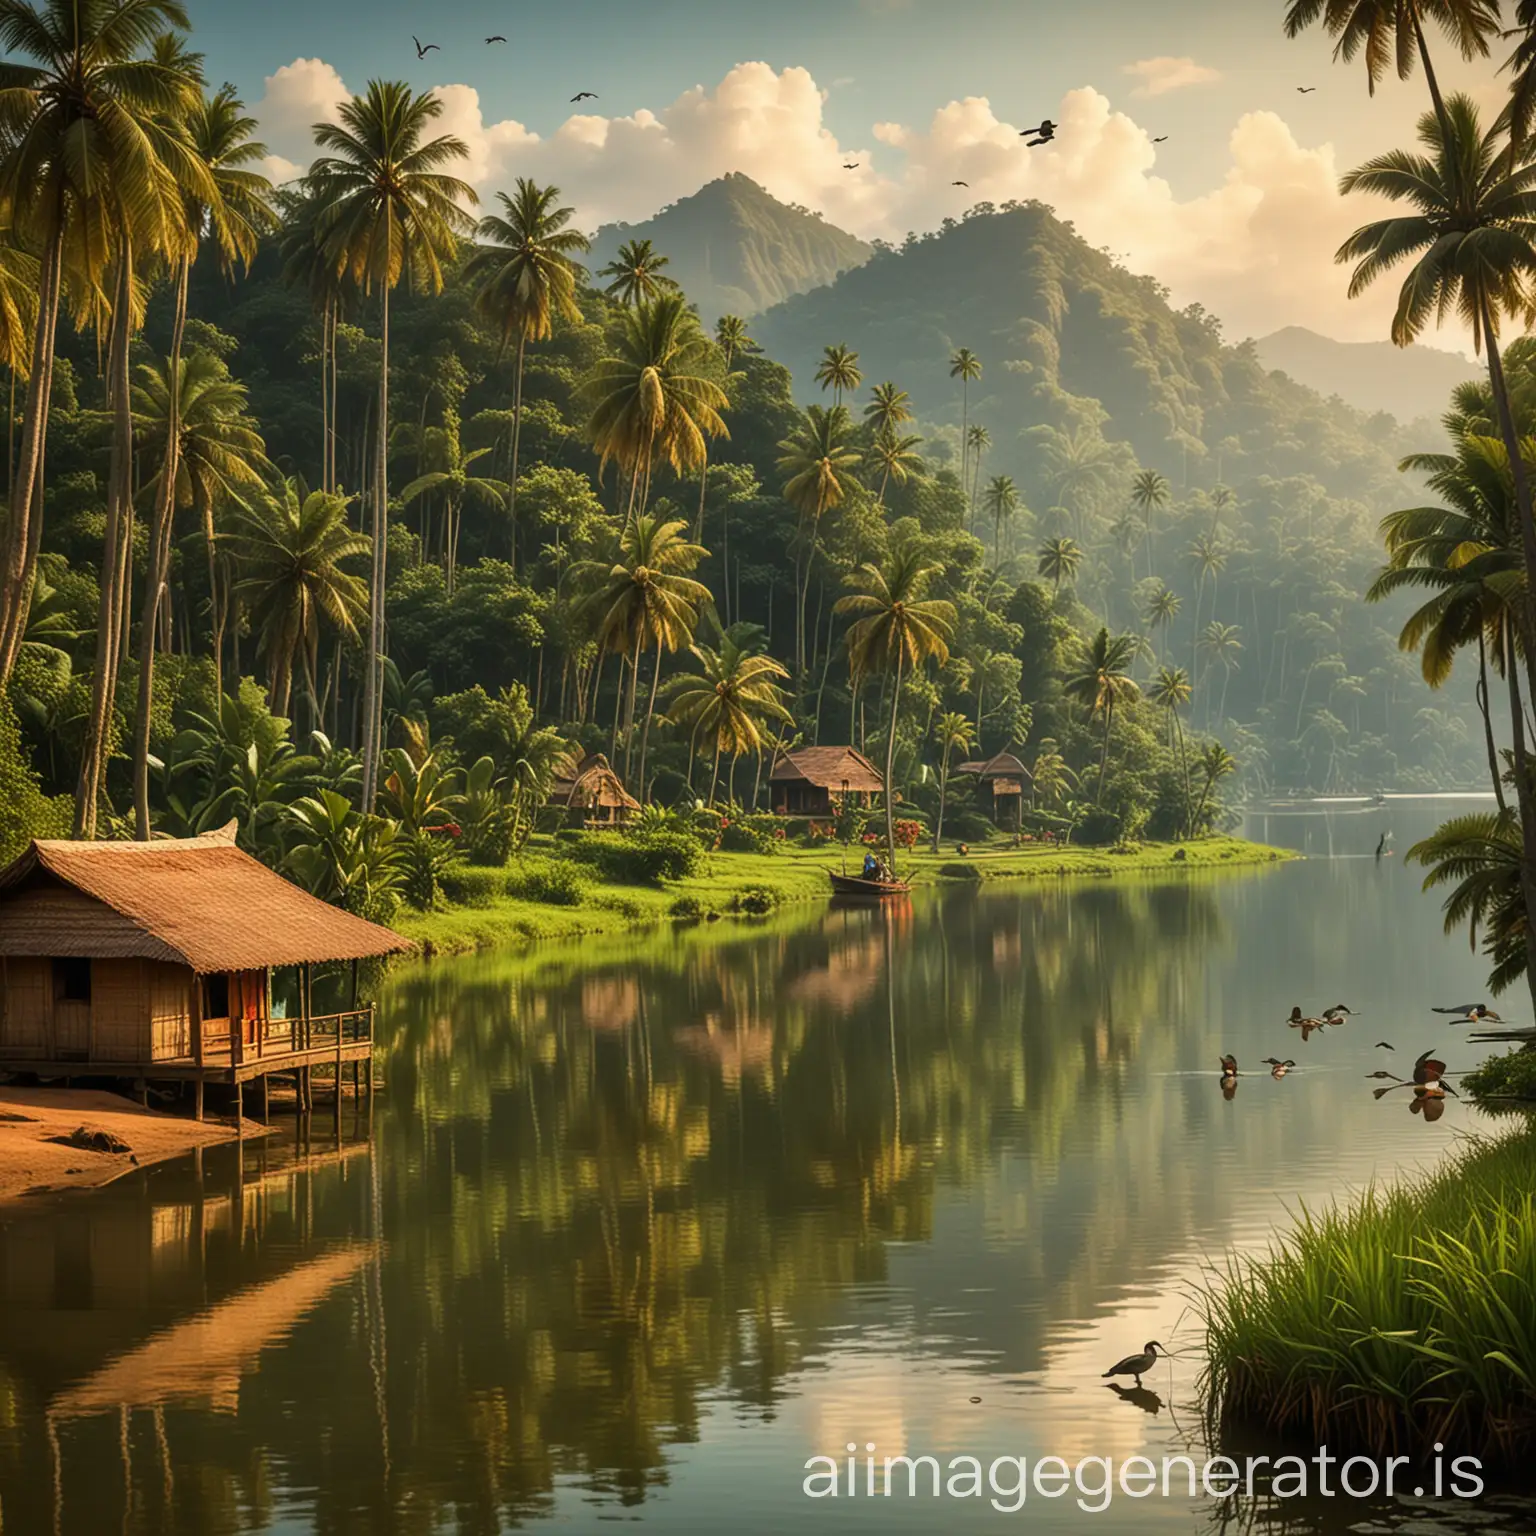 Create an image of natural beauty of Kerala,including mountain,lake ,hut birds and animals